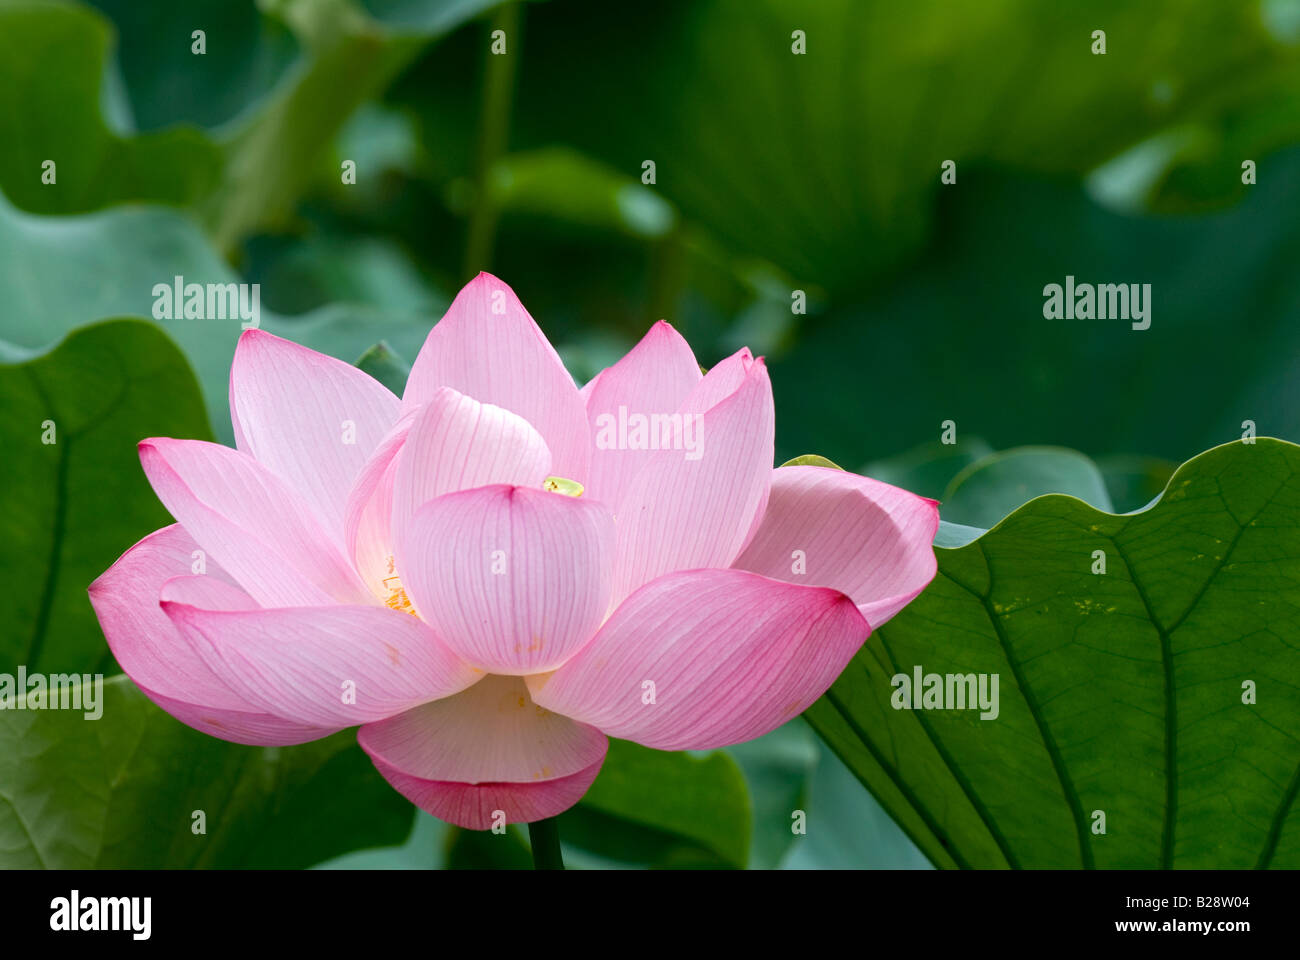 Large pink lotus blossom amongst deep green lily pads in Shinobazu pond at Ueno Park in Tokyo Stock Photo